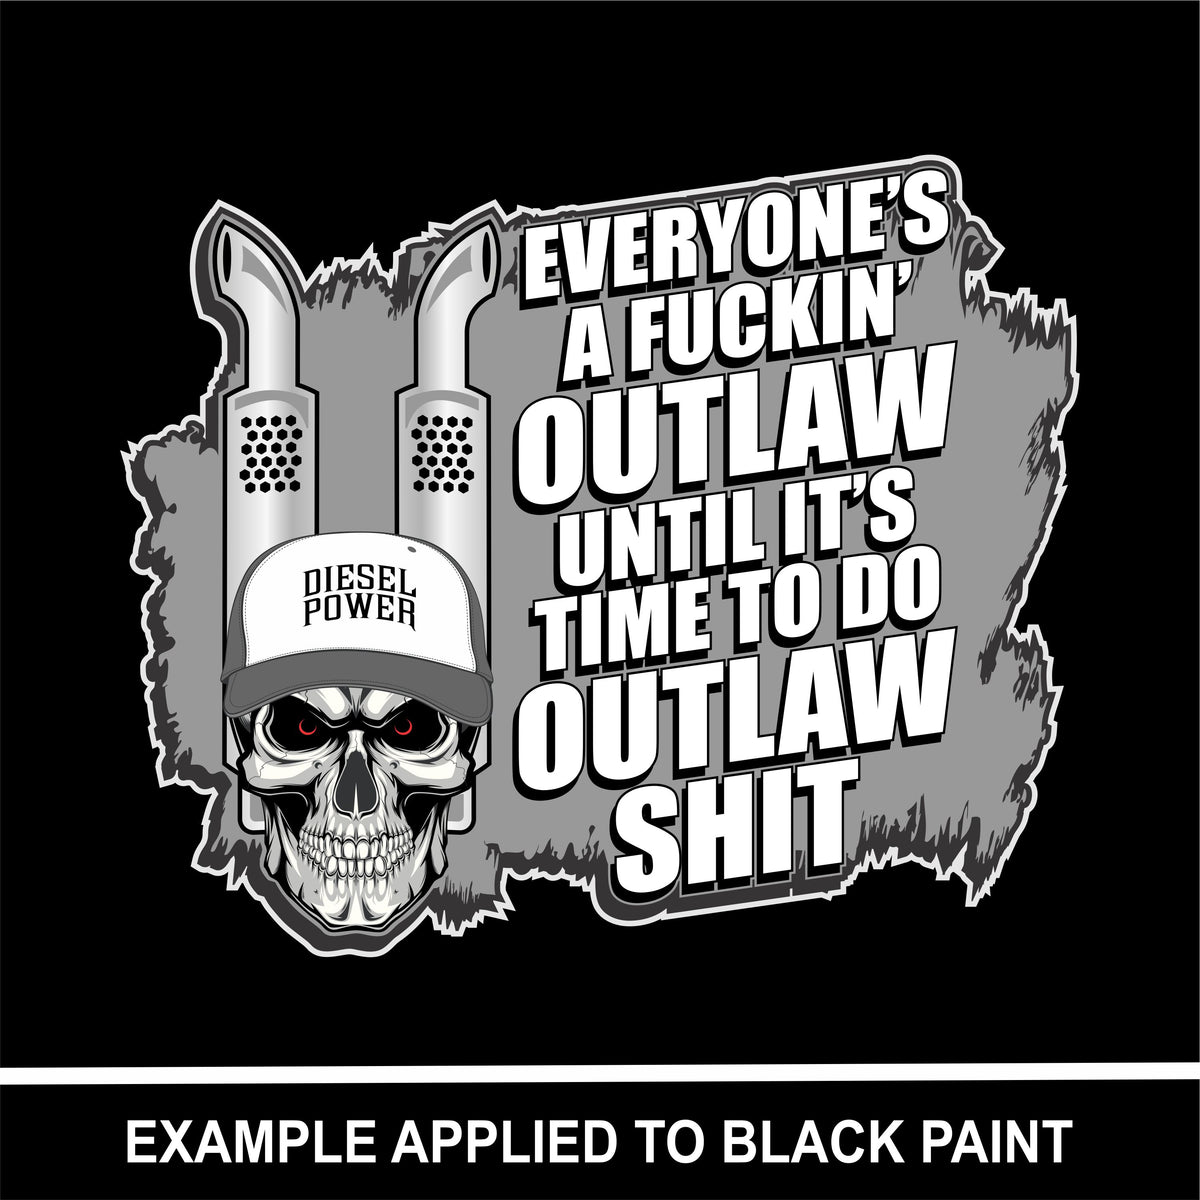 Everyone's A Fucking Outlaw - Full Color Vinyl Decal - 8"w x 6.69"h Free Shipping